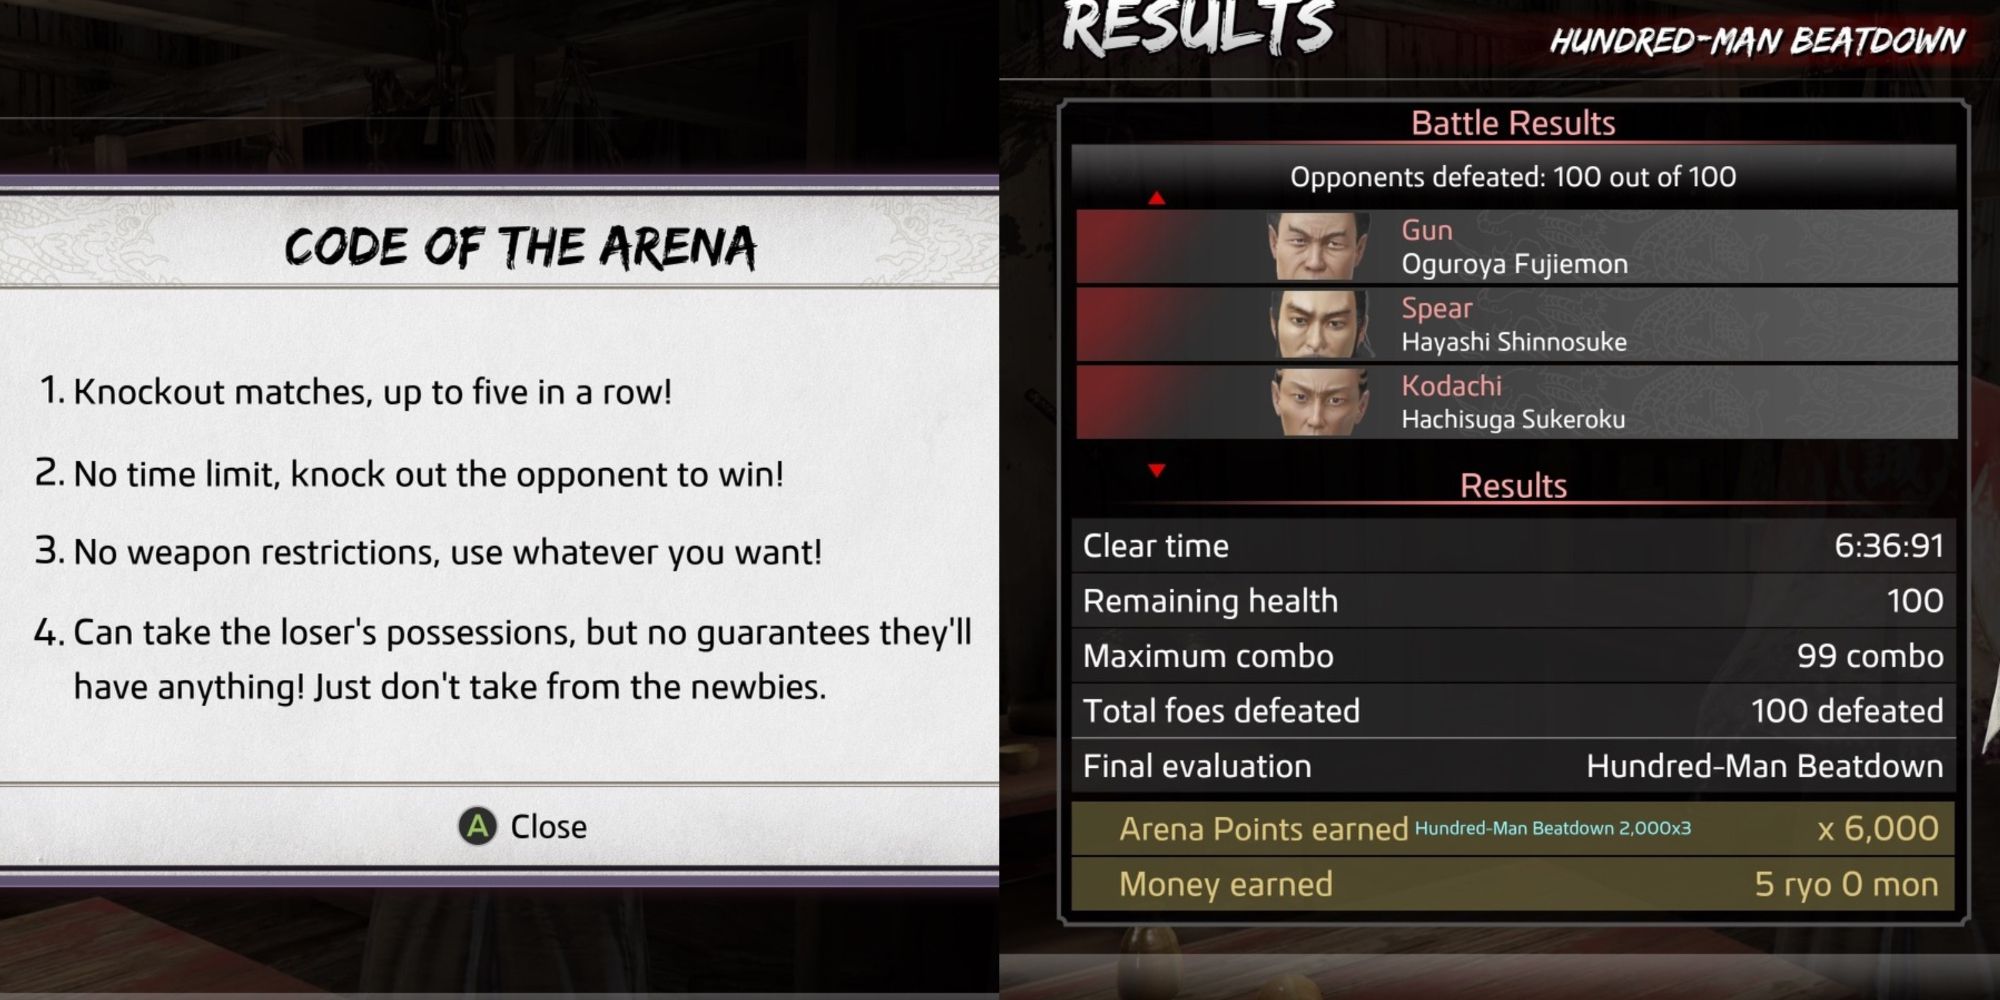 The Arena's posted Rules and a Reward Screen after defeating the hundred-man beatdown.